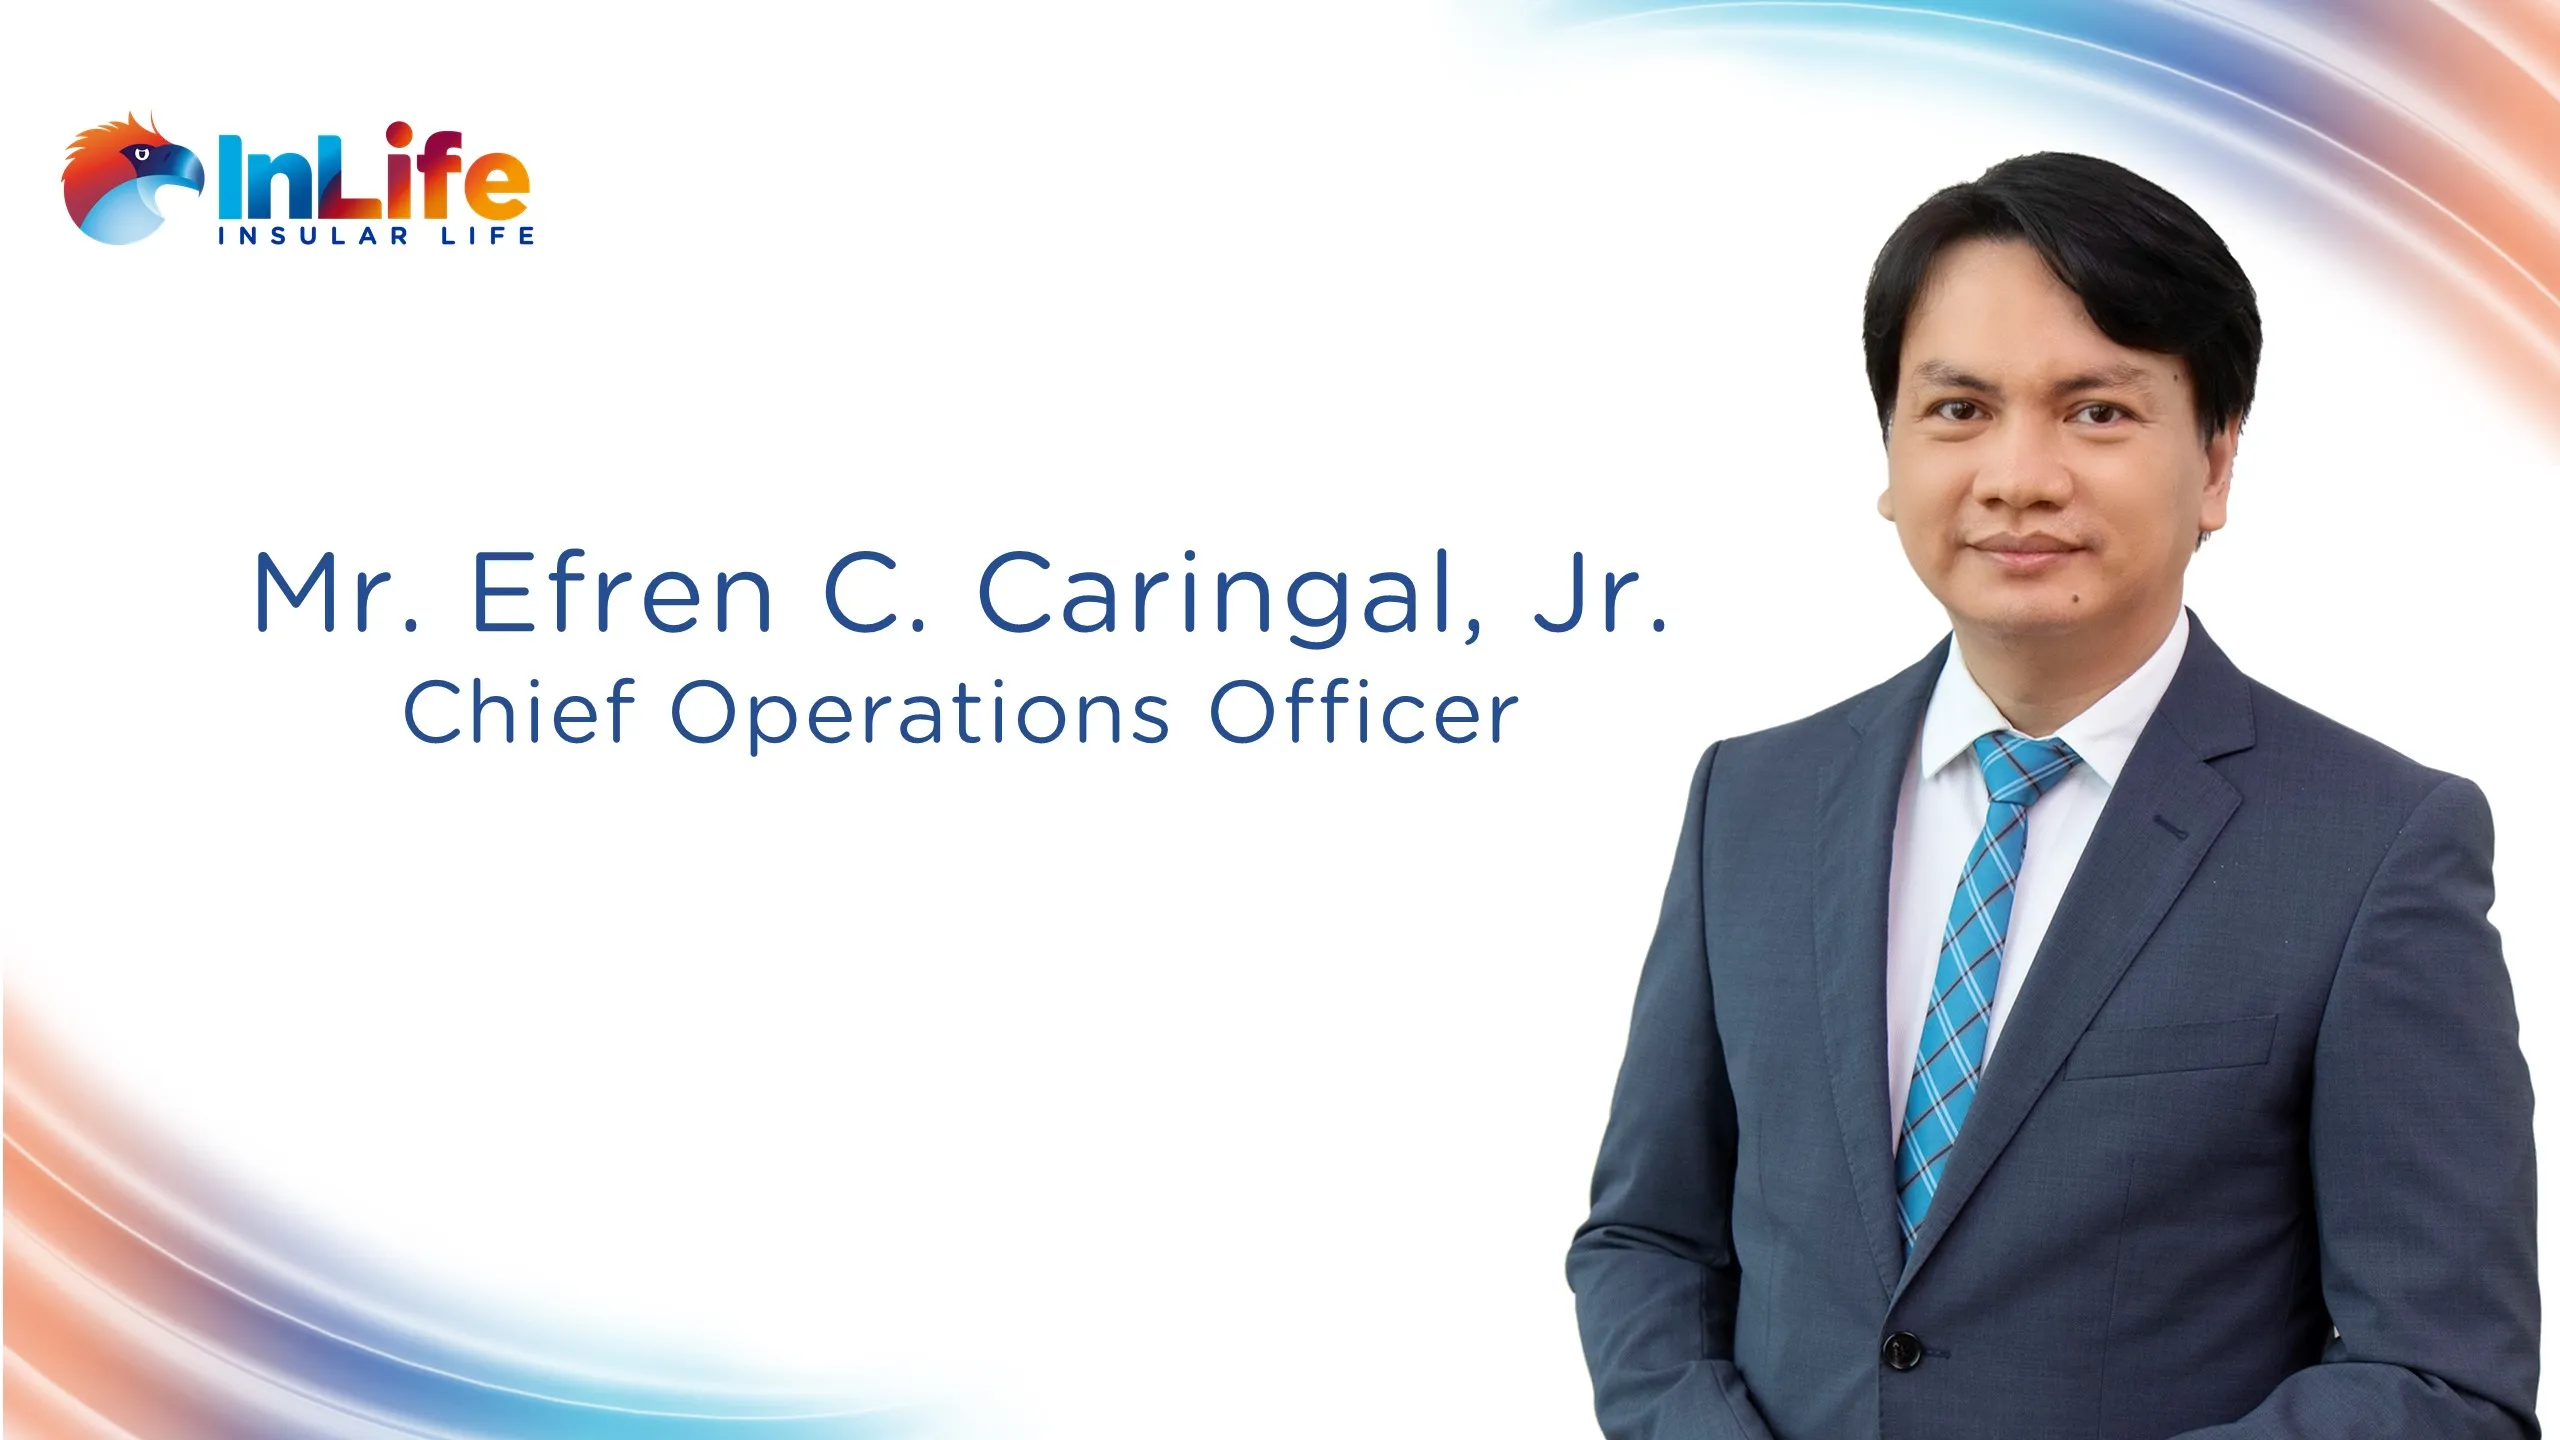 insular-life-names-new-chief-operations-officer